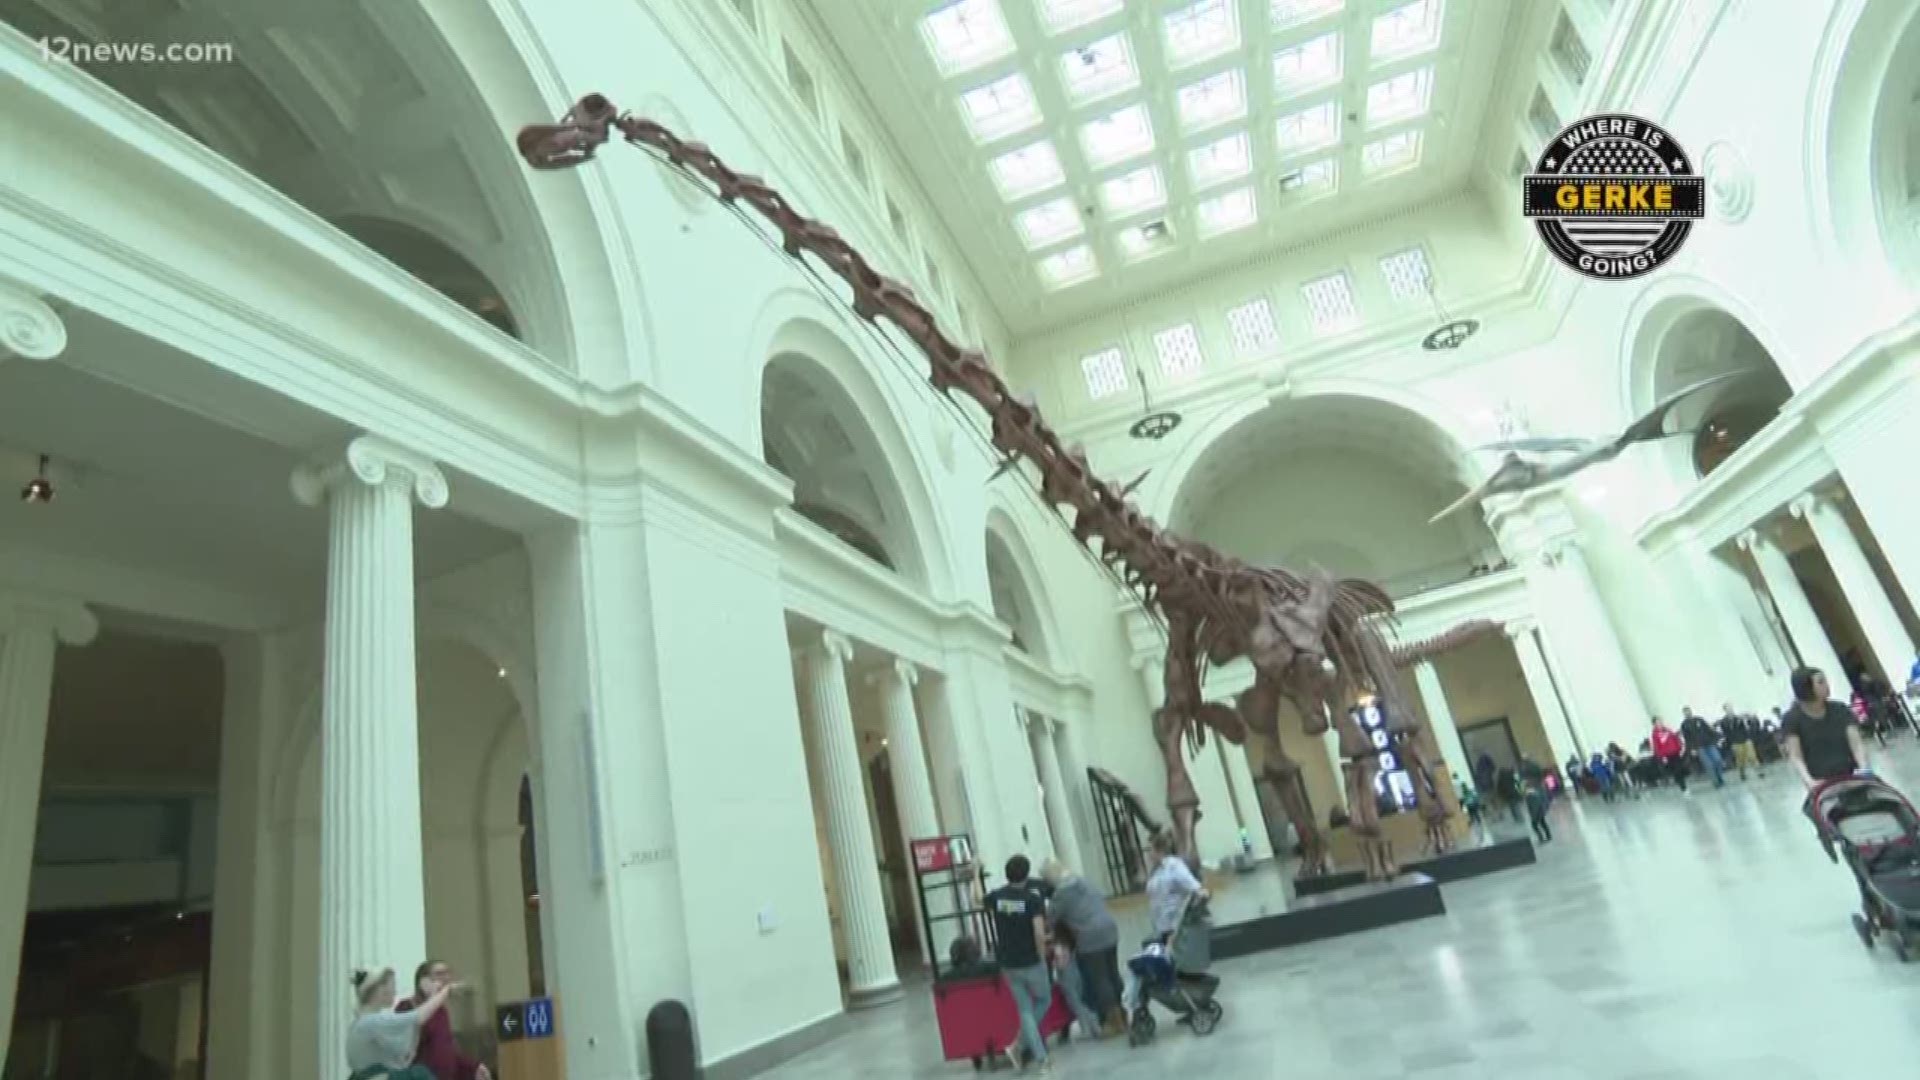 The Field Museum of Natural History is one of the largest museums in the world and boasts one of the most impressive collections of dinosaur fossils. Among them: “Sue,” the largest, most complete Tyrannosaurus Rex skeleton in the world.